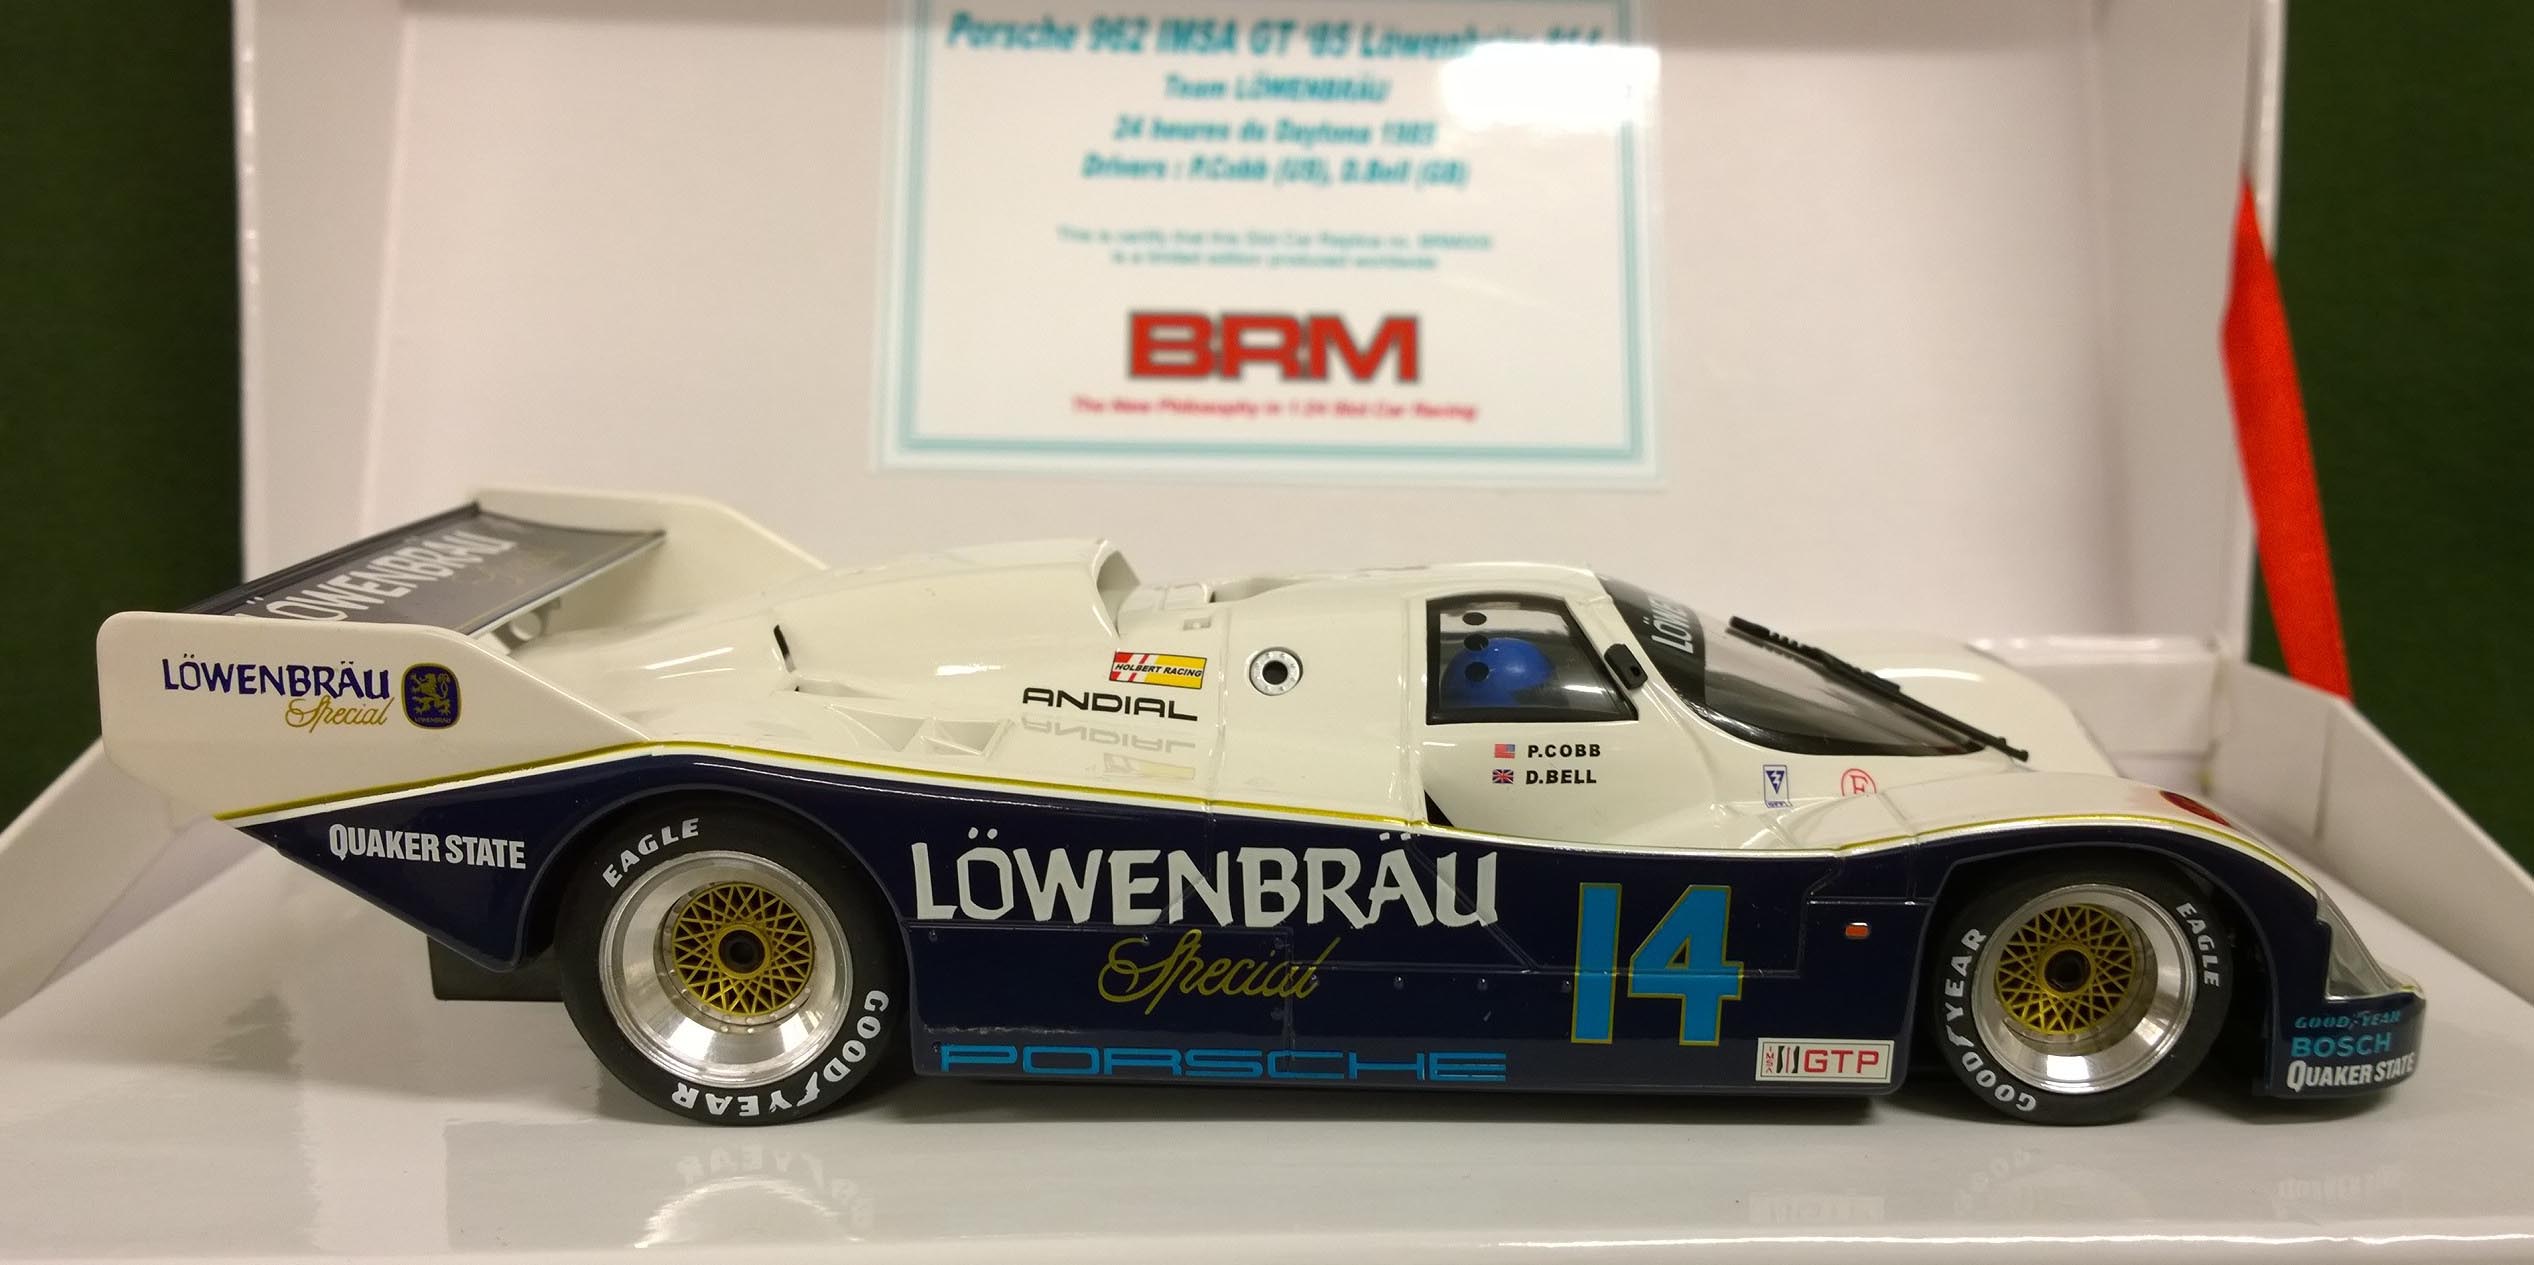 BRM009AW 'Lowenbrau' Porsche 962 #14  with anglewinder chassis